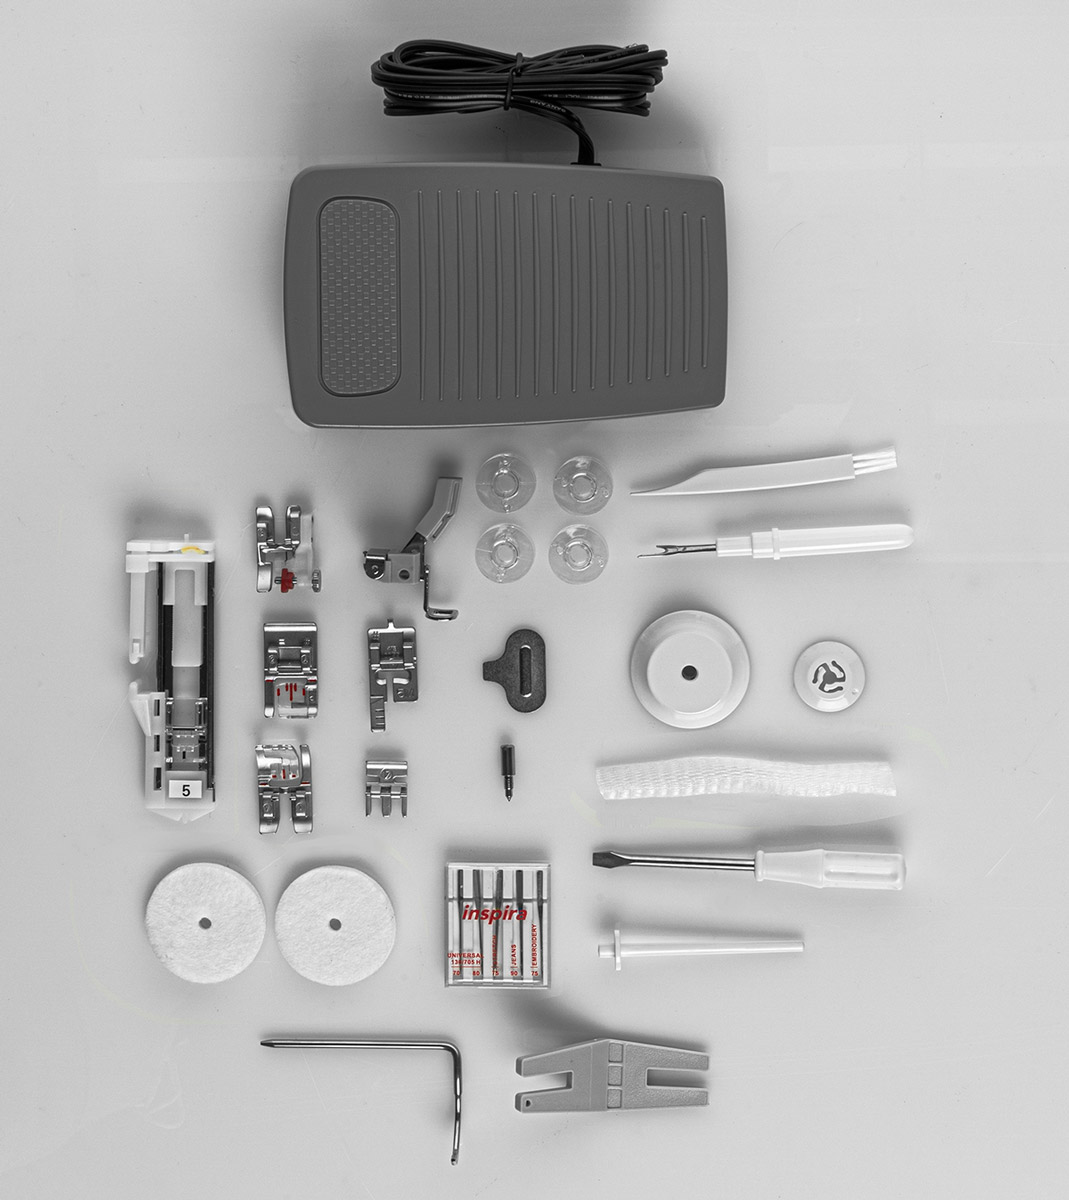 Accessories included with the Pfaff Quilt Ambition 635